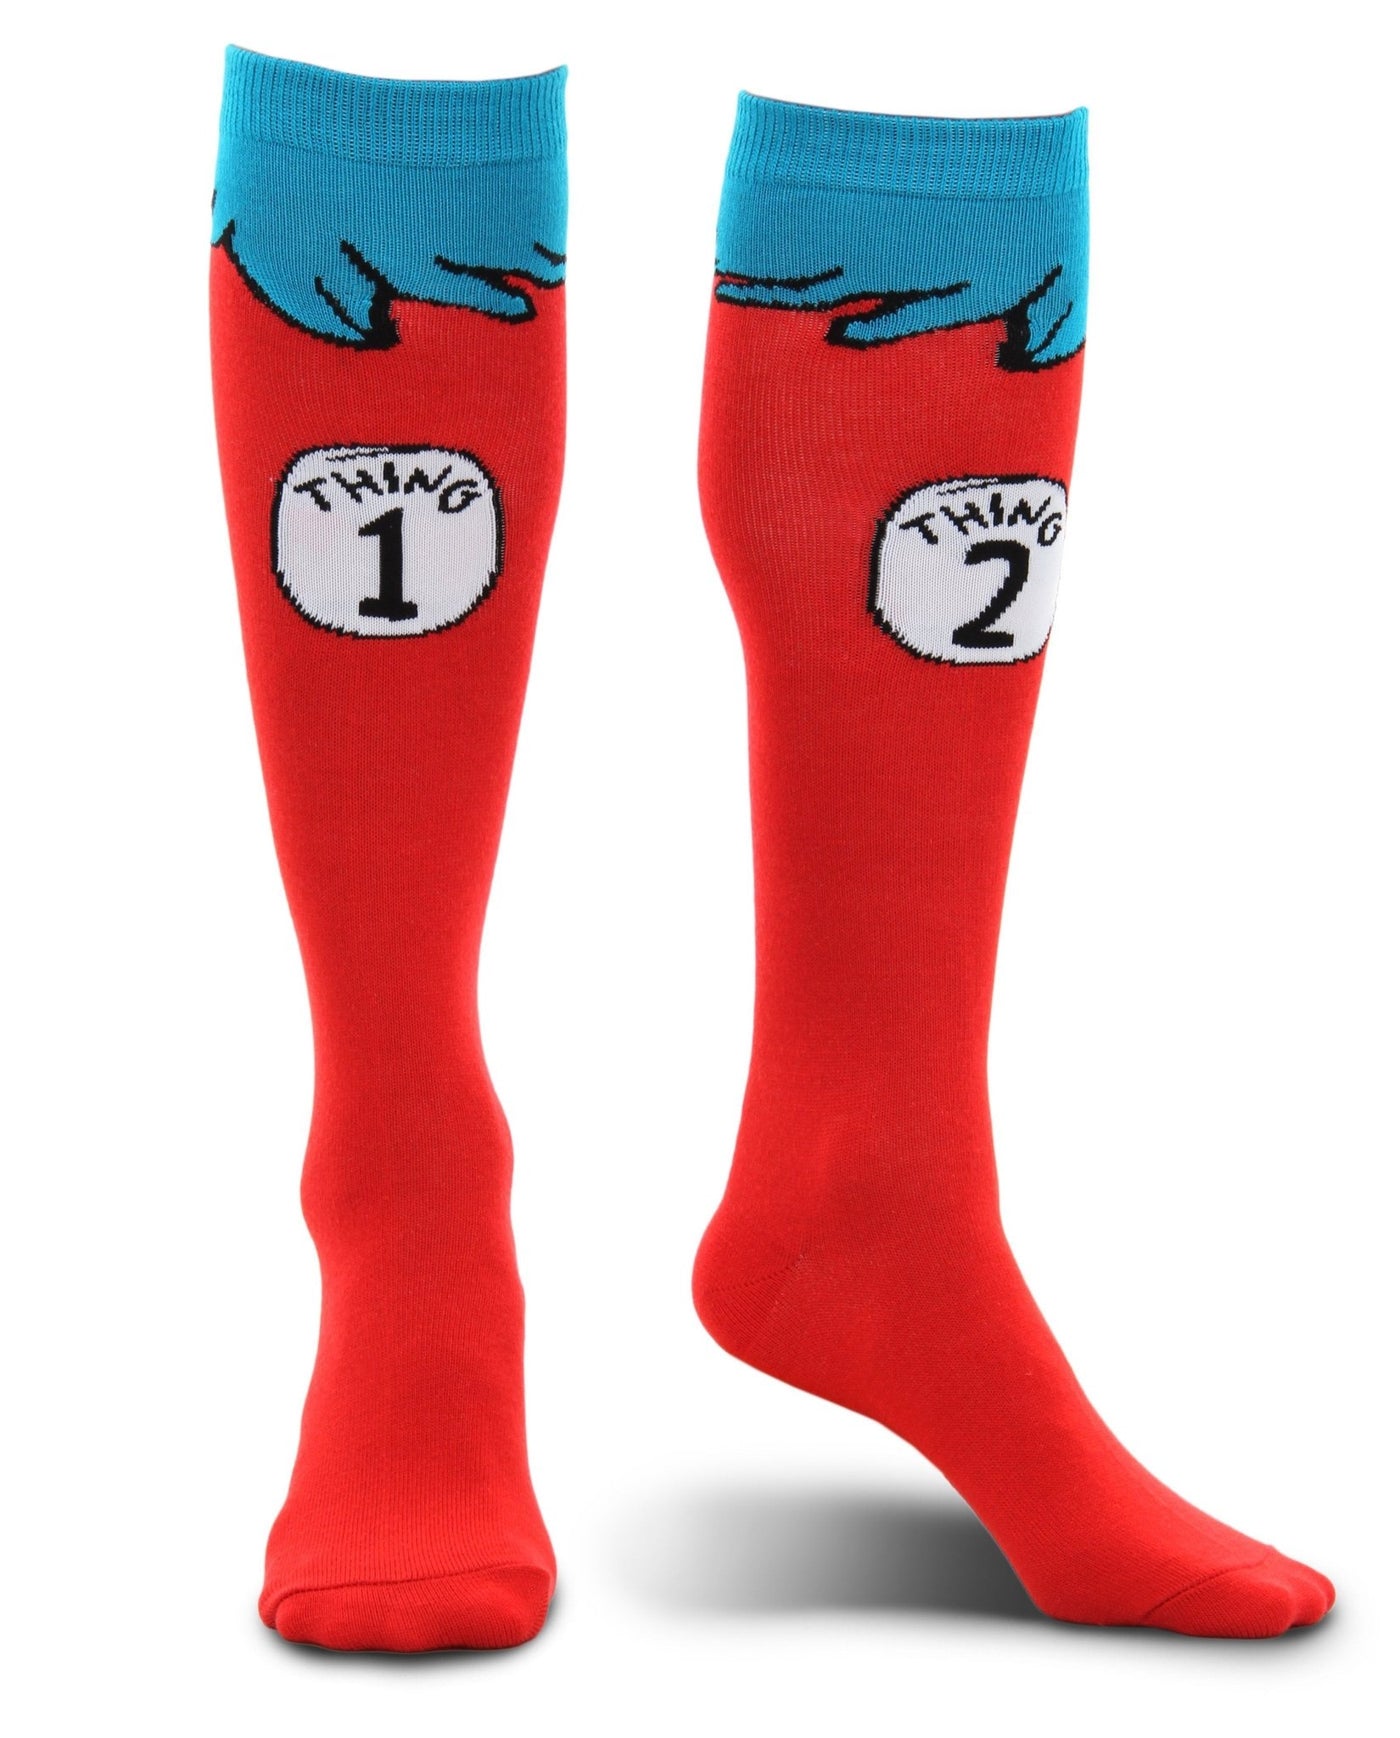 Child Thing 1 & Thing 2 Socks - Dr. Seuss - JJ's Party House